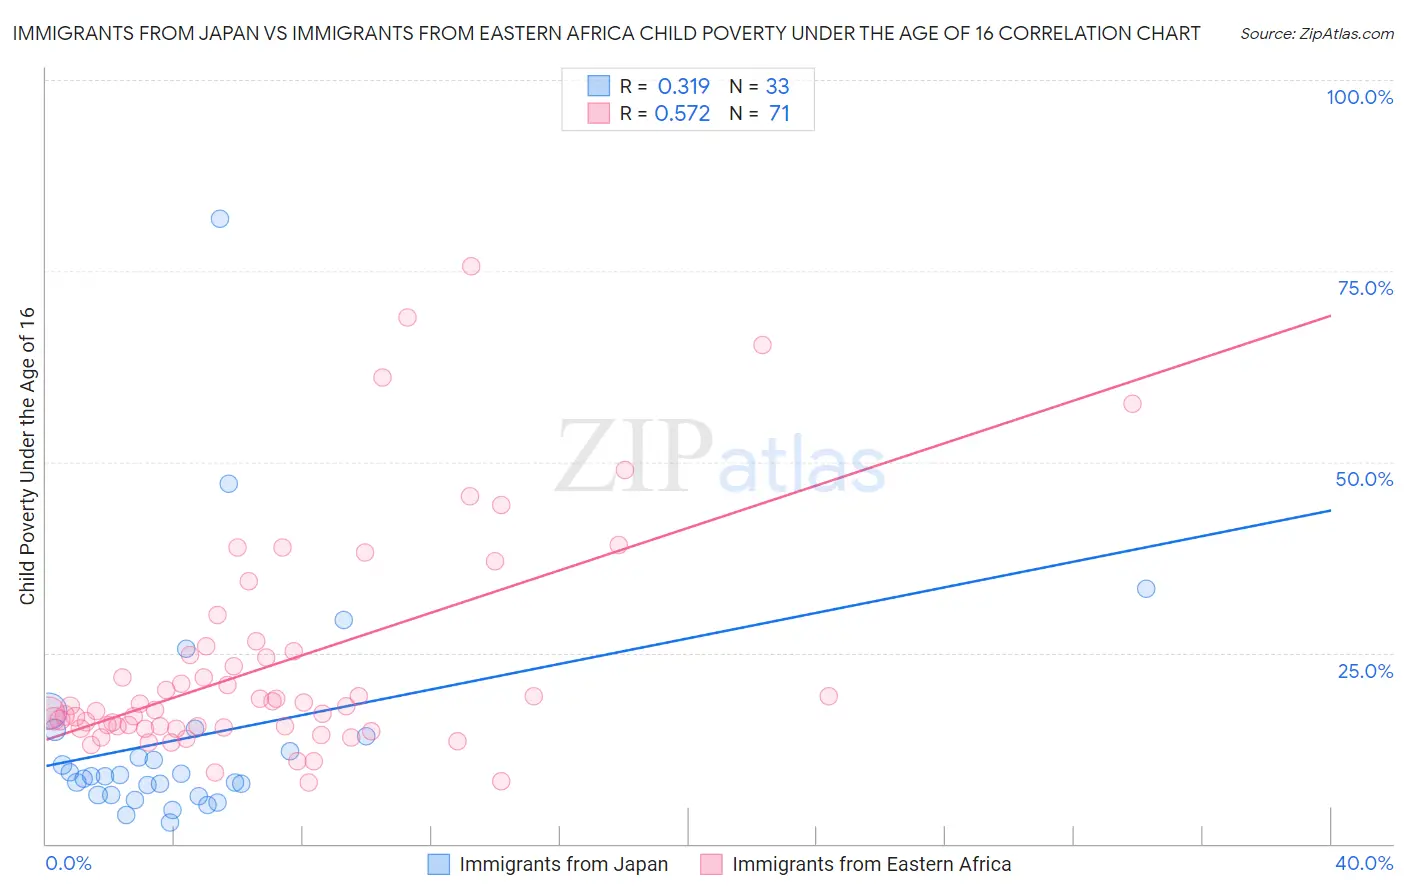 Immigrants from Japan vs Immigrants from Eastern Africa Child Poverty Under the Age of 16